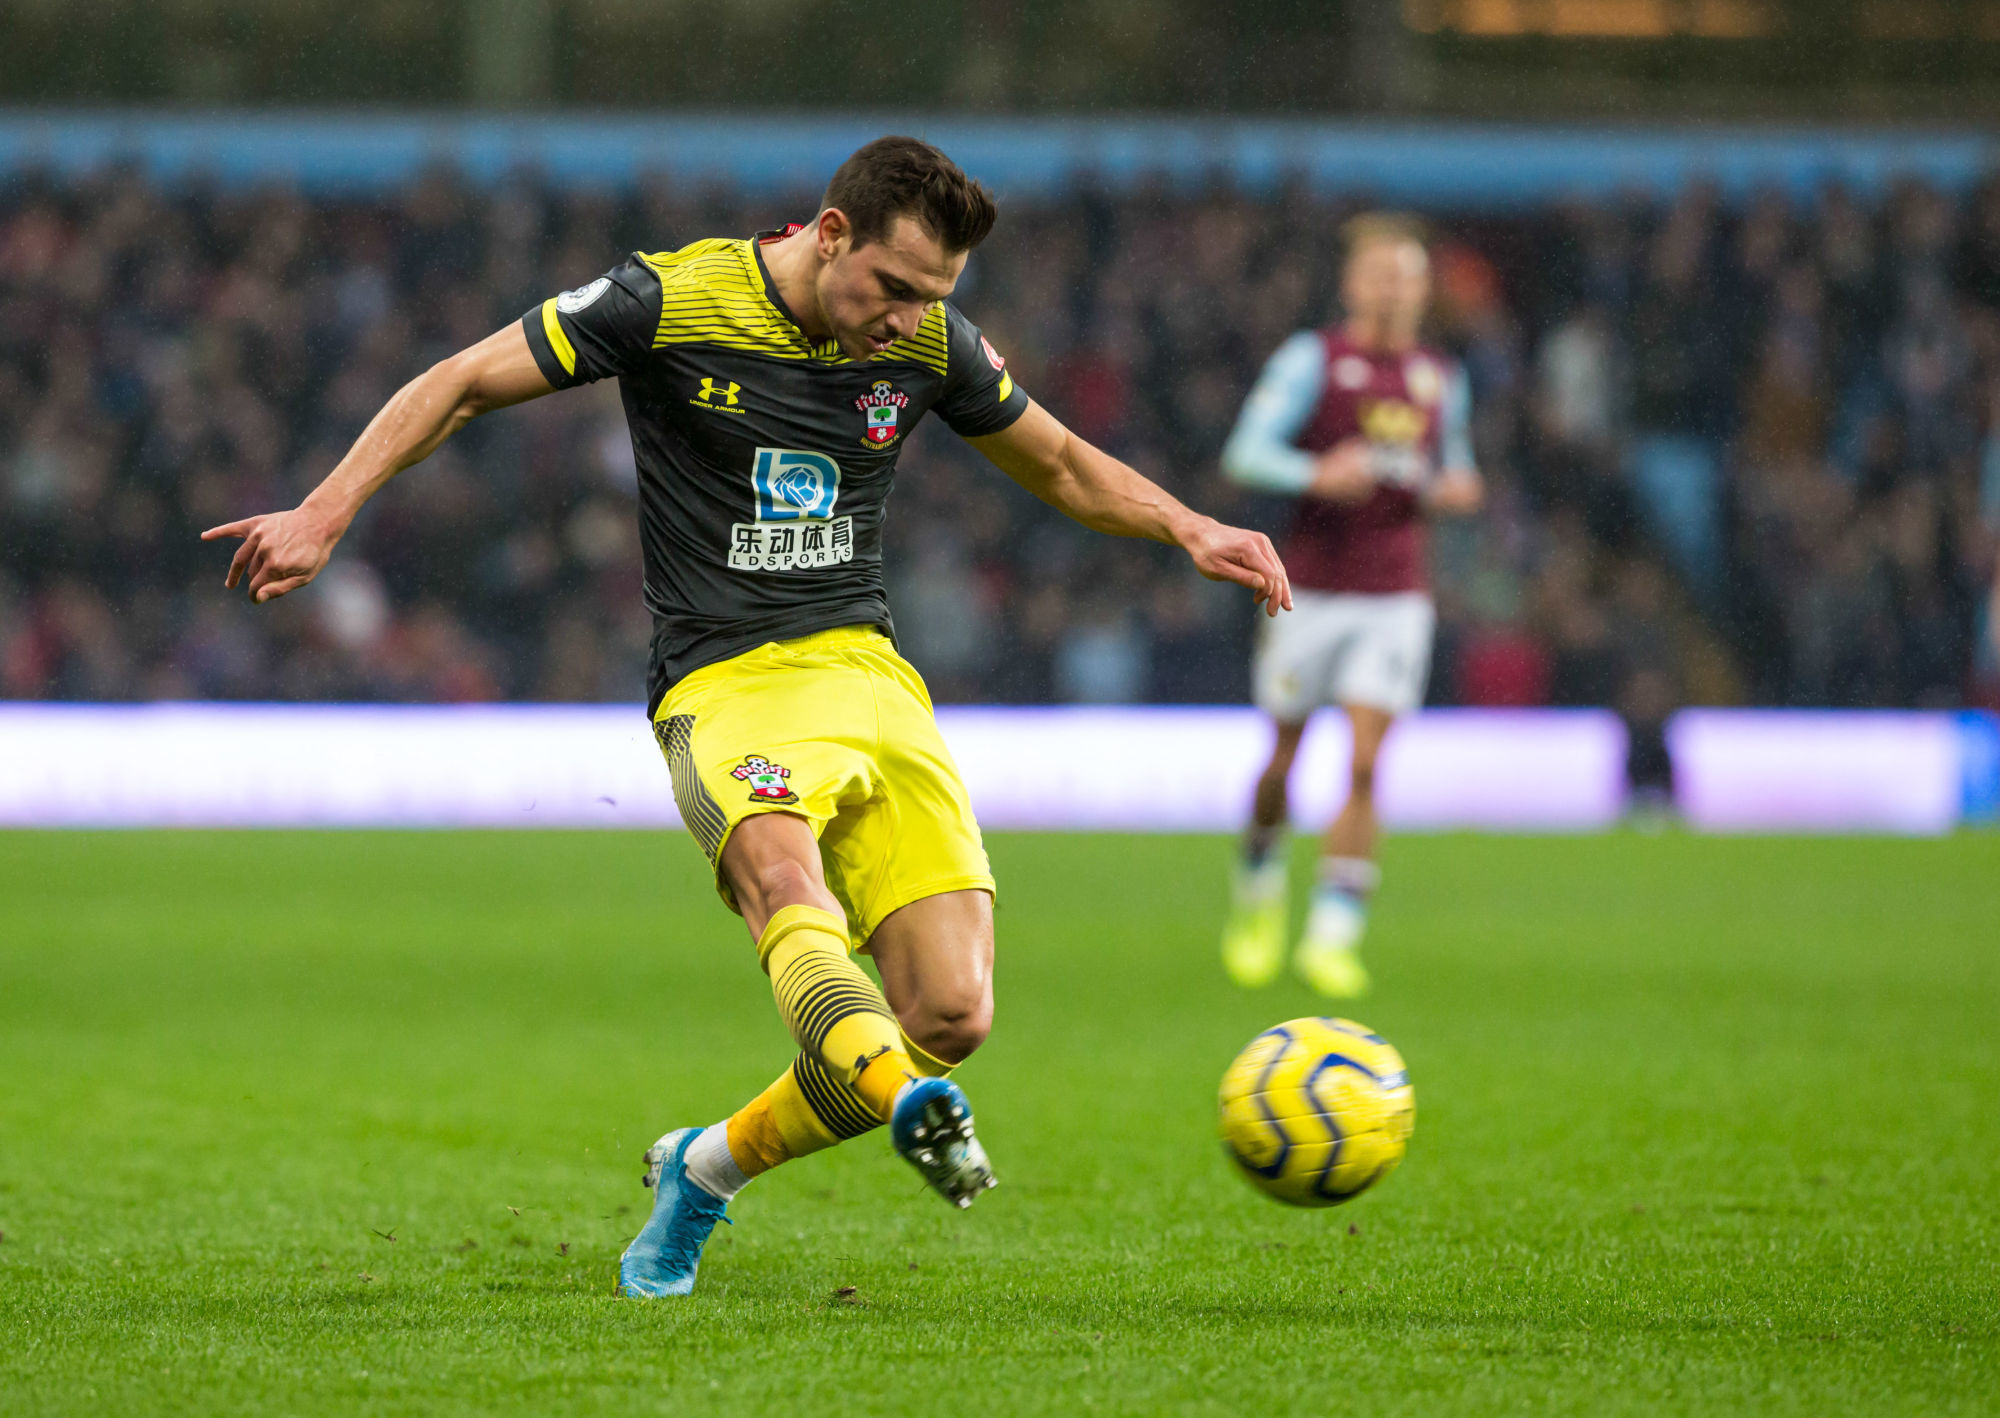 21st December 2019; Villa Park, Birmingham, Midlands, England; English Premier League Football, Aston Villa versus Southampton; Cedric of Southampton crossing the ball - Strictly Editorial Use Only. No use with unauthorized audio, video, data, fixture lists, club/league logos or 'live' services. Online in-match use limited to 120 images, no video emulation. No use in betting, games or single club/league/player publications 

Photo by Icon Sport - Cedric SOARES - Villa Park - Birmingham (Angleterre)